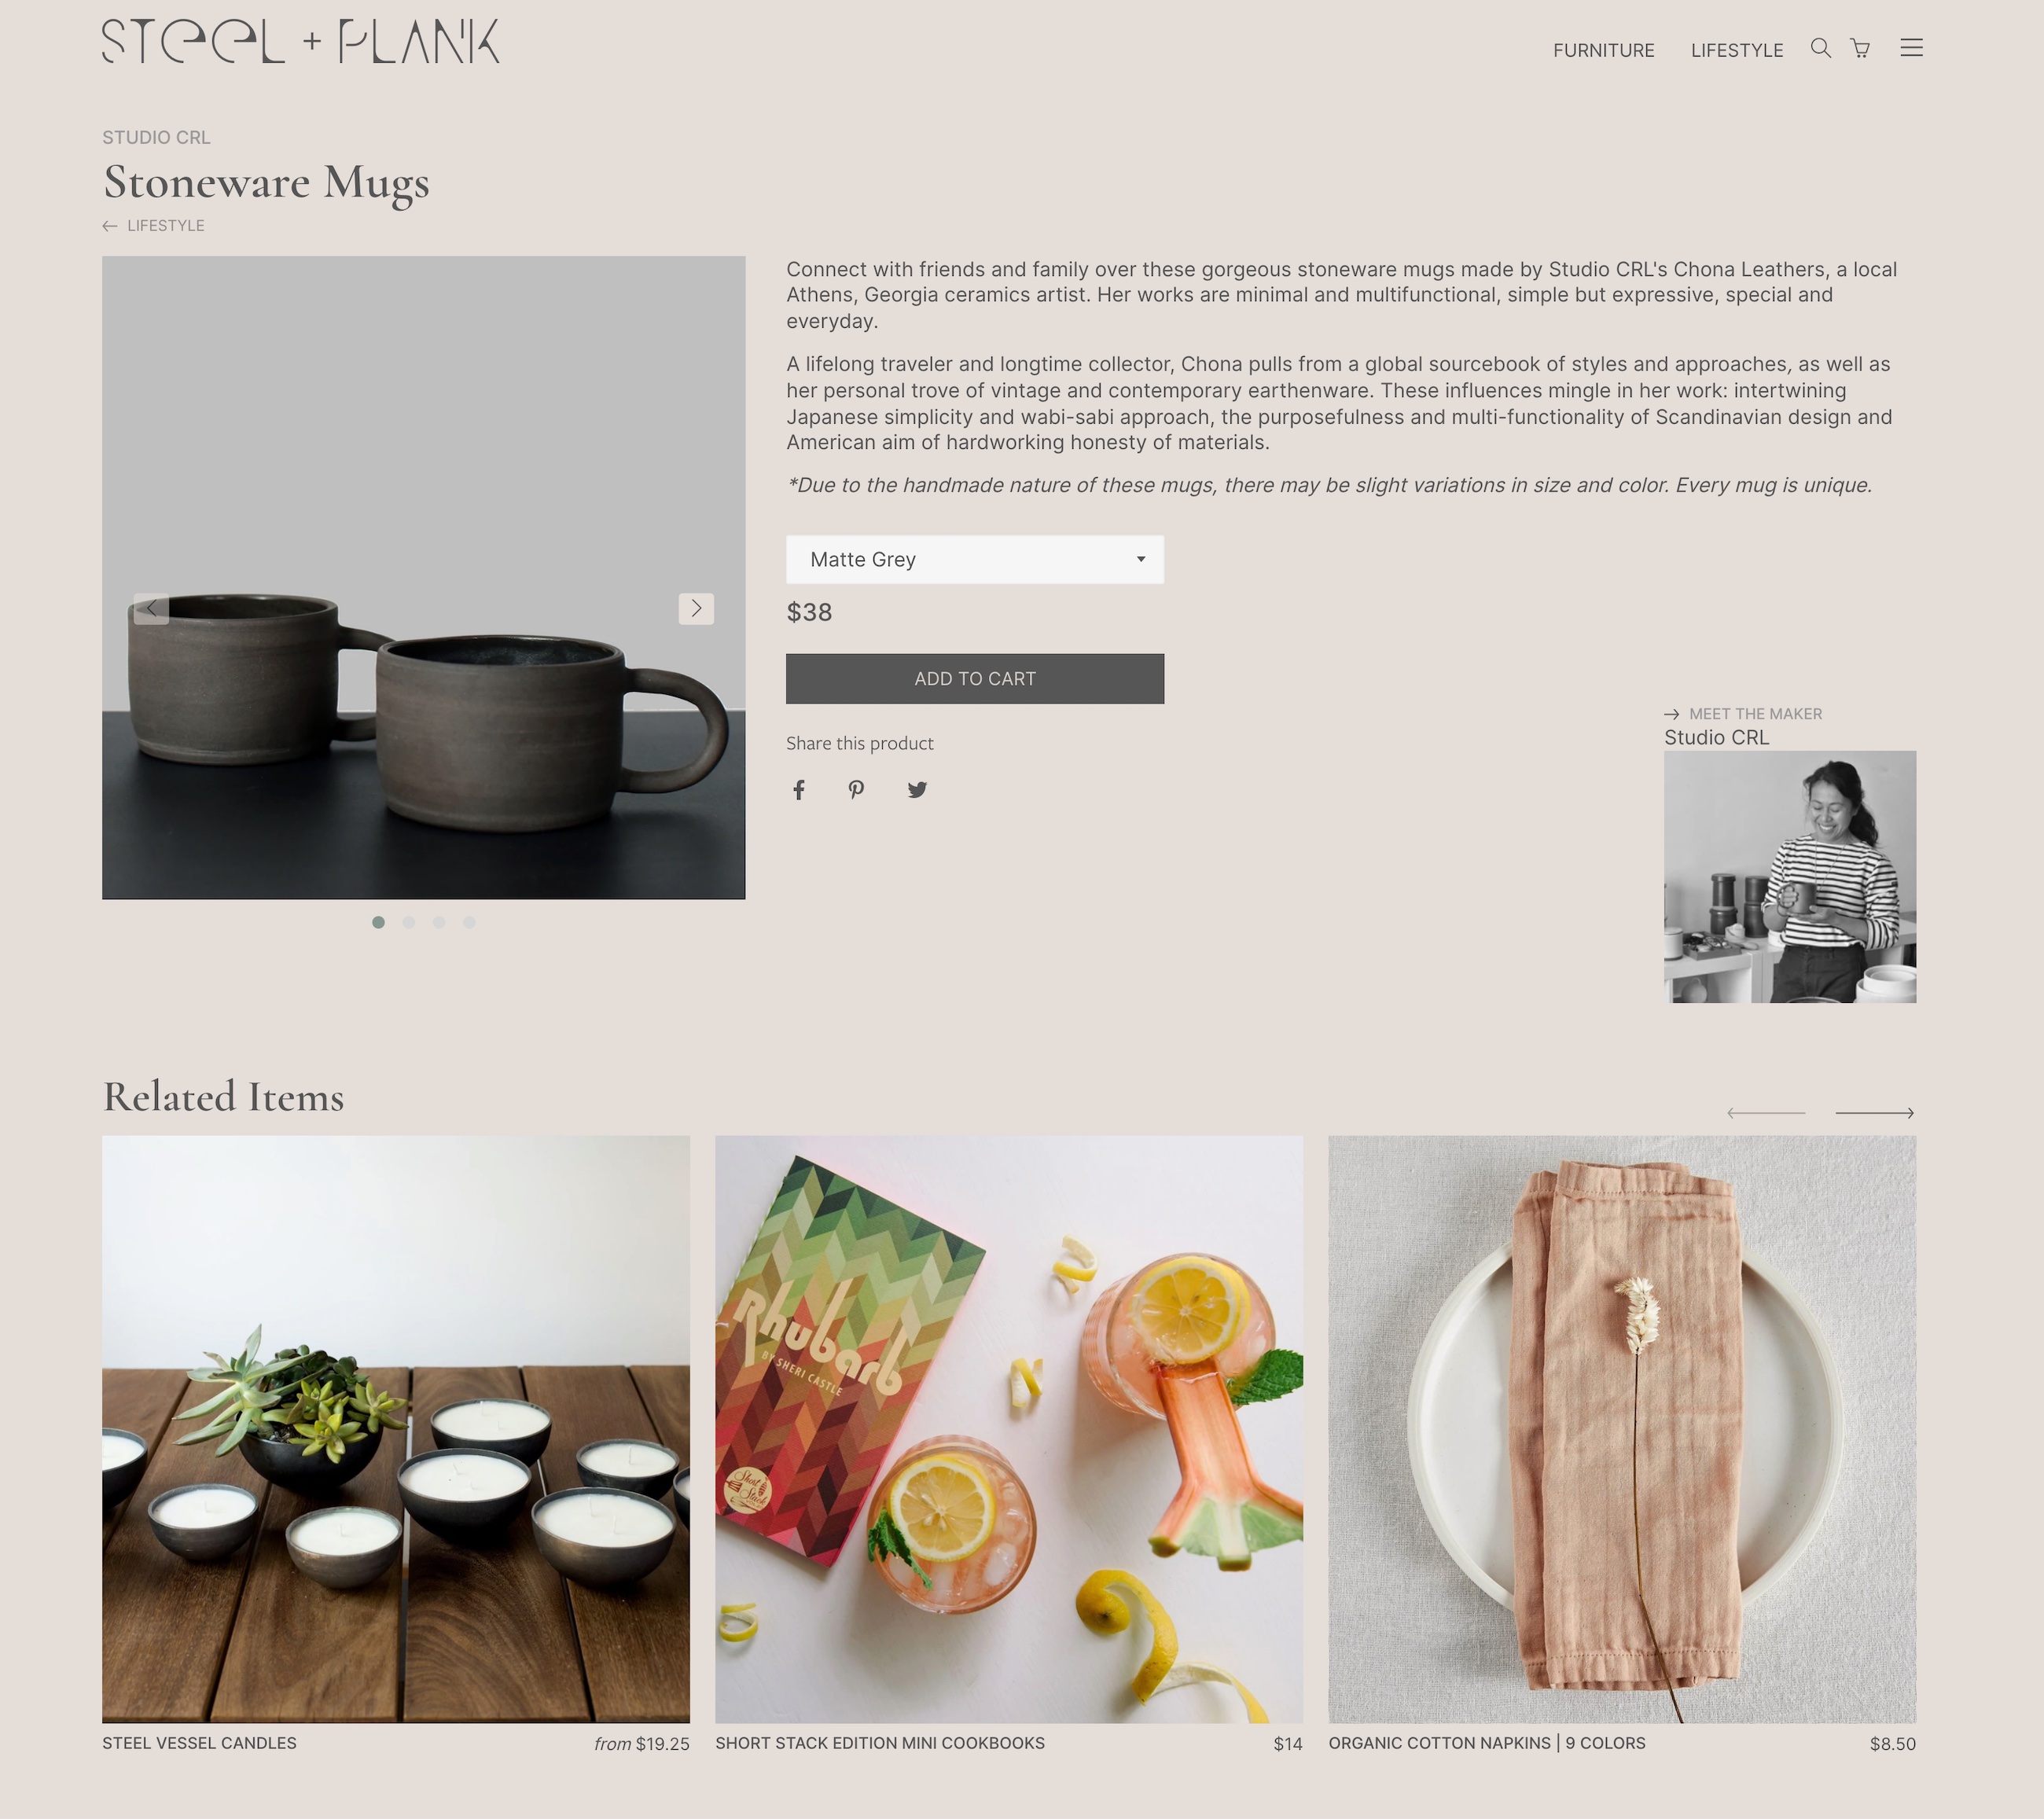 Steel & Plank lifestyle product page